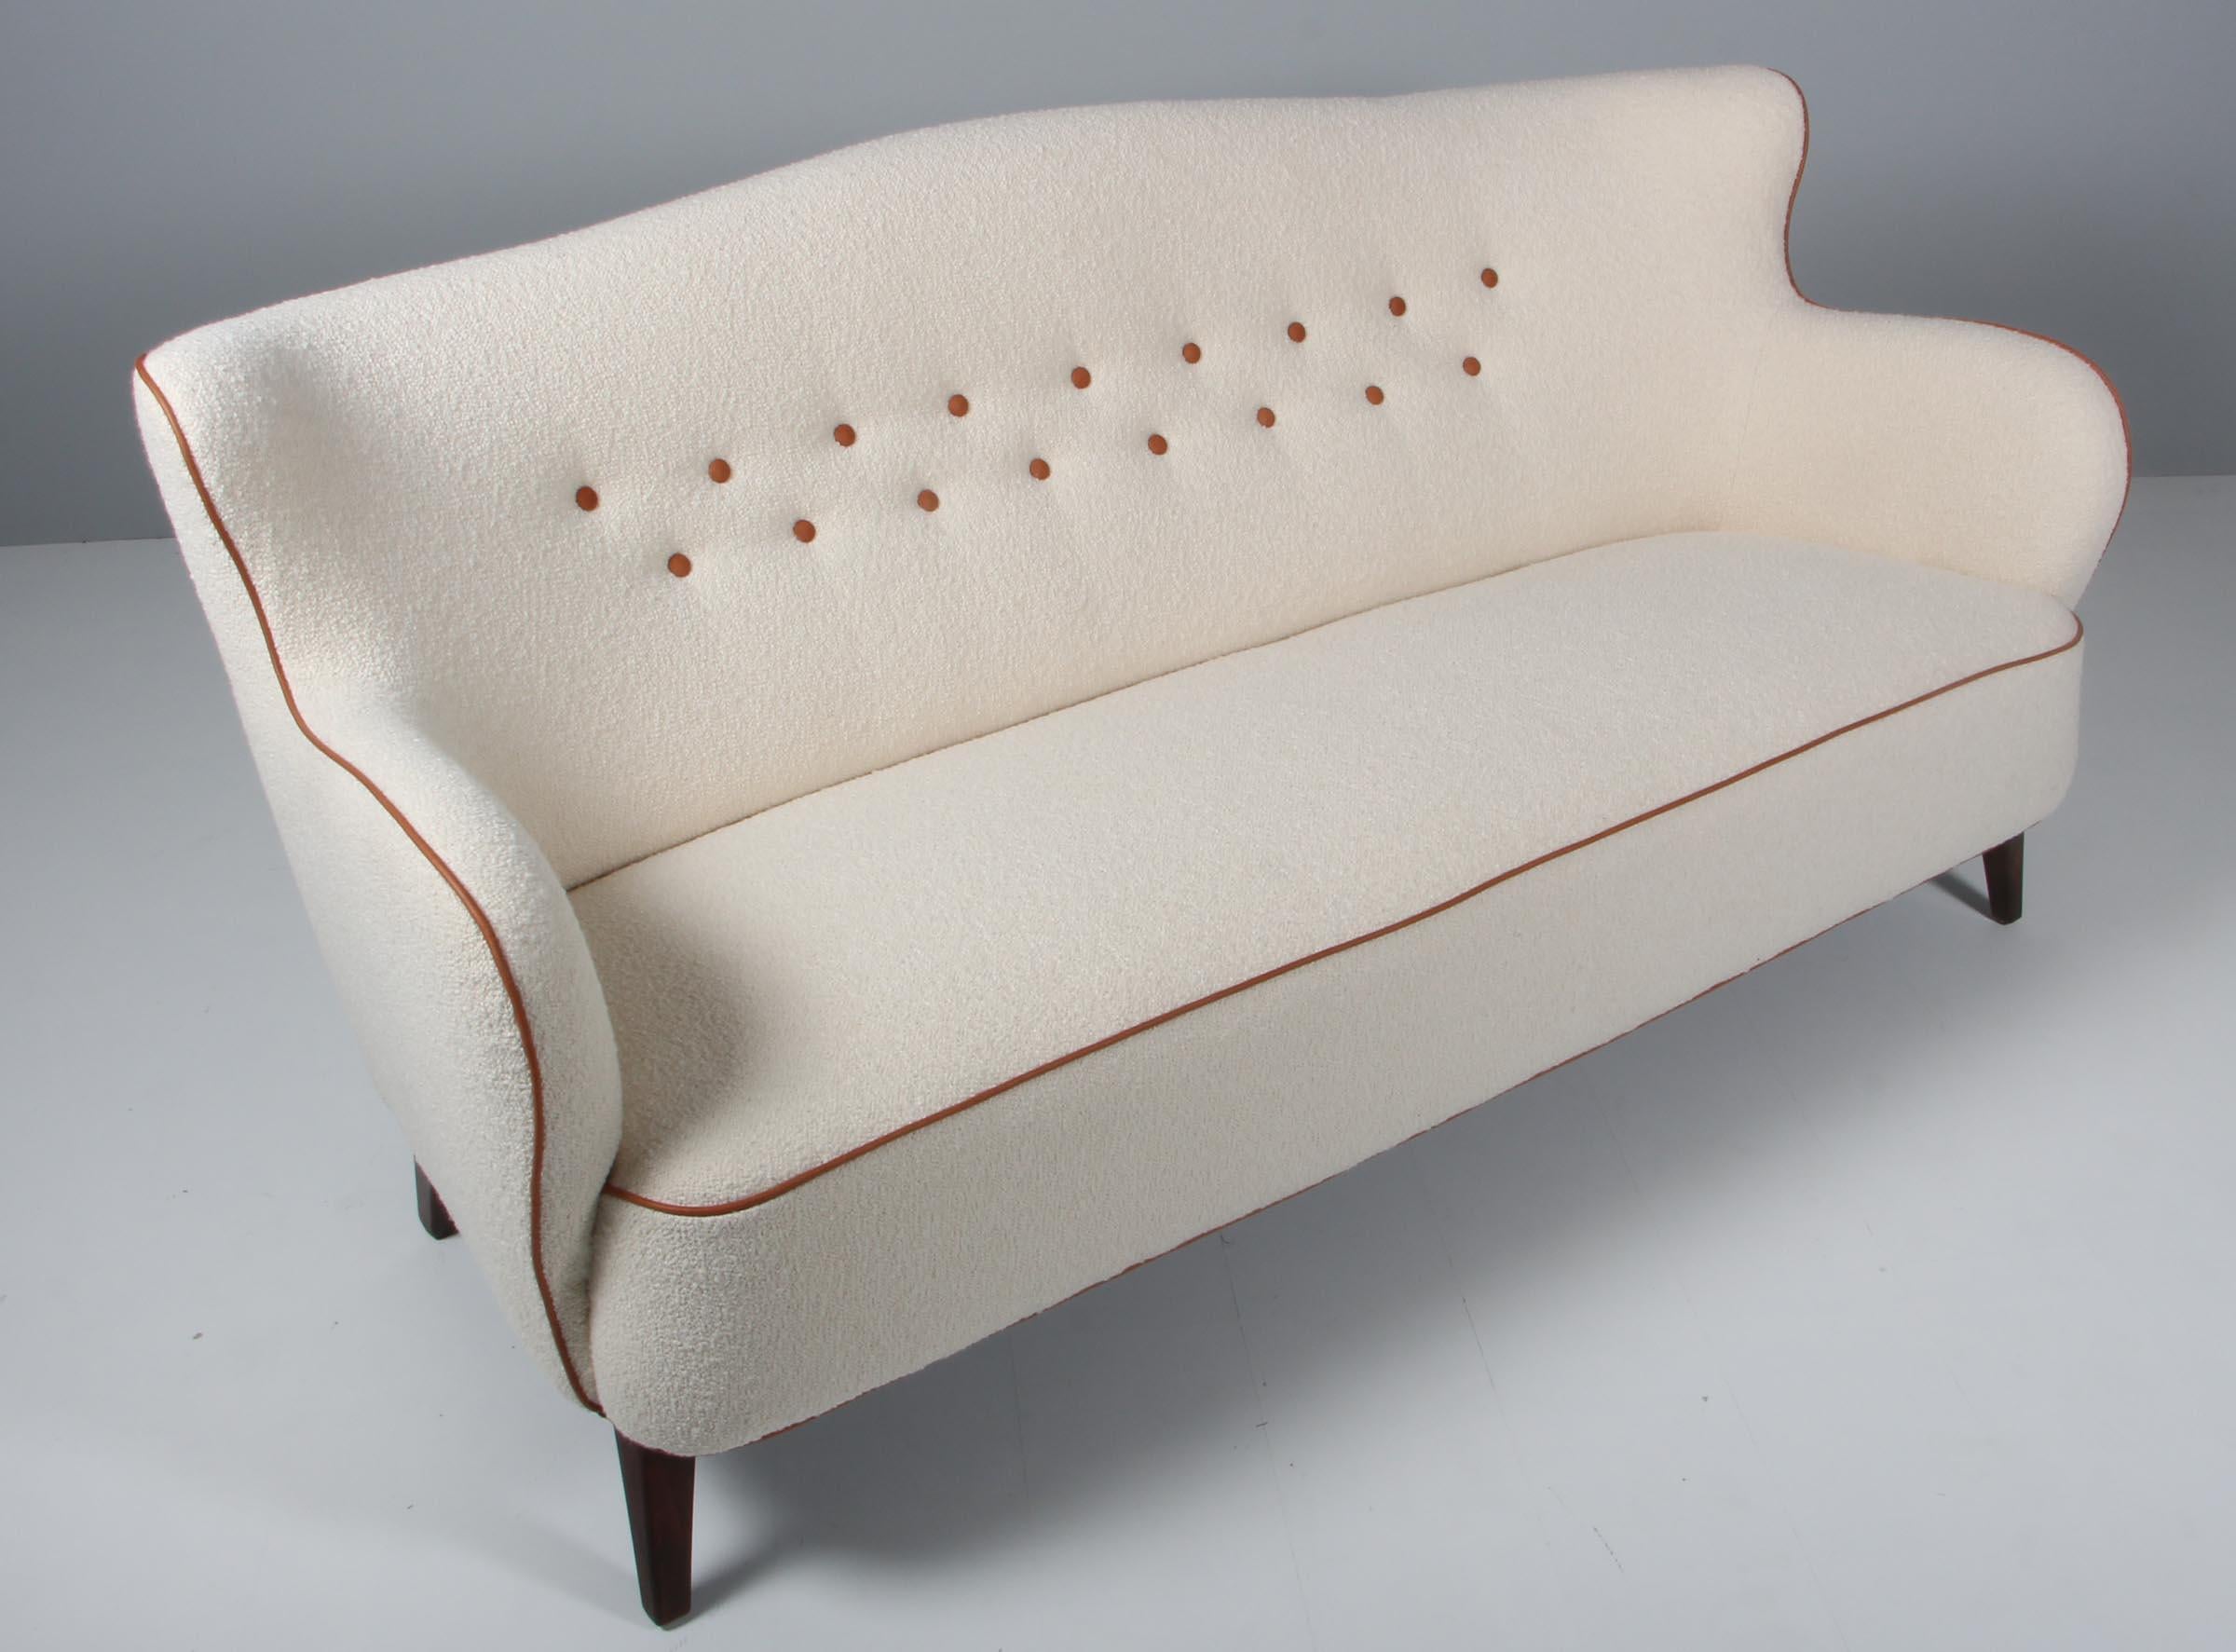 Scandinavian Modern Danish Cabinetmaker, Three Seat Sofa in Boucle and Aniline Leather, 1950s For Sale